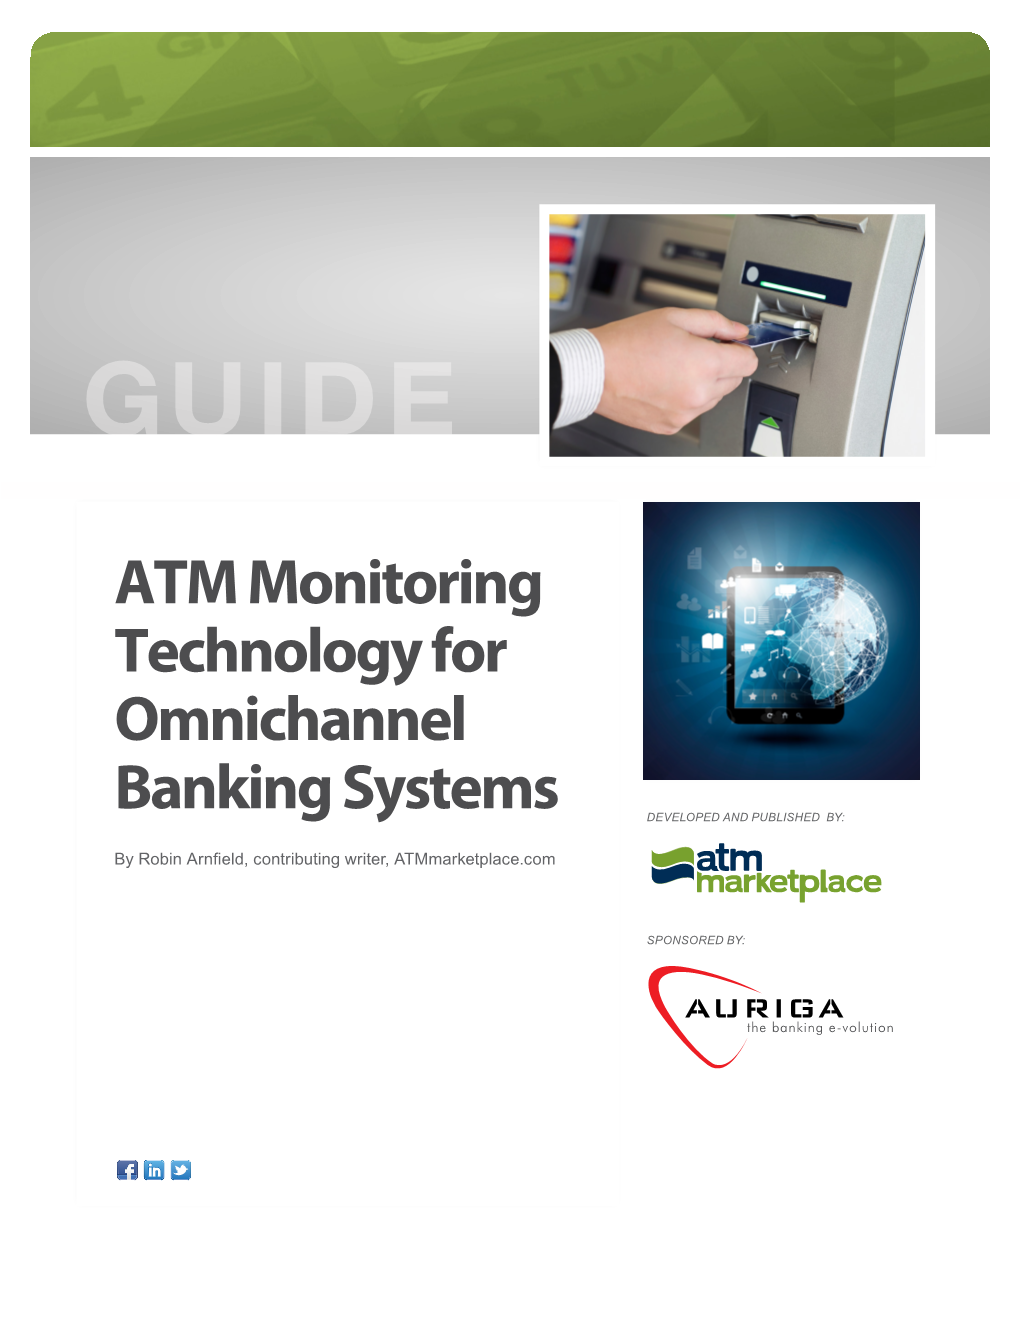 ATM Monitoring Technology for Omnichannel Banking Systems DEVELOPED and PUBLISHED BY